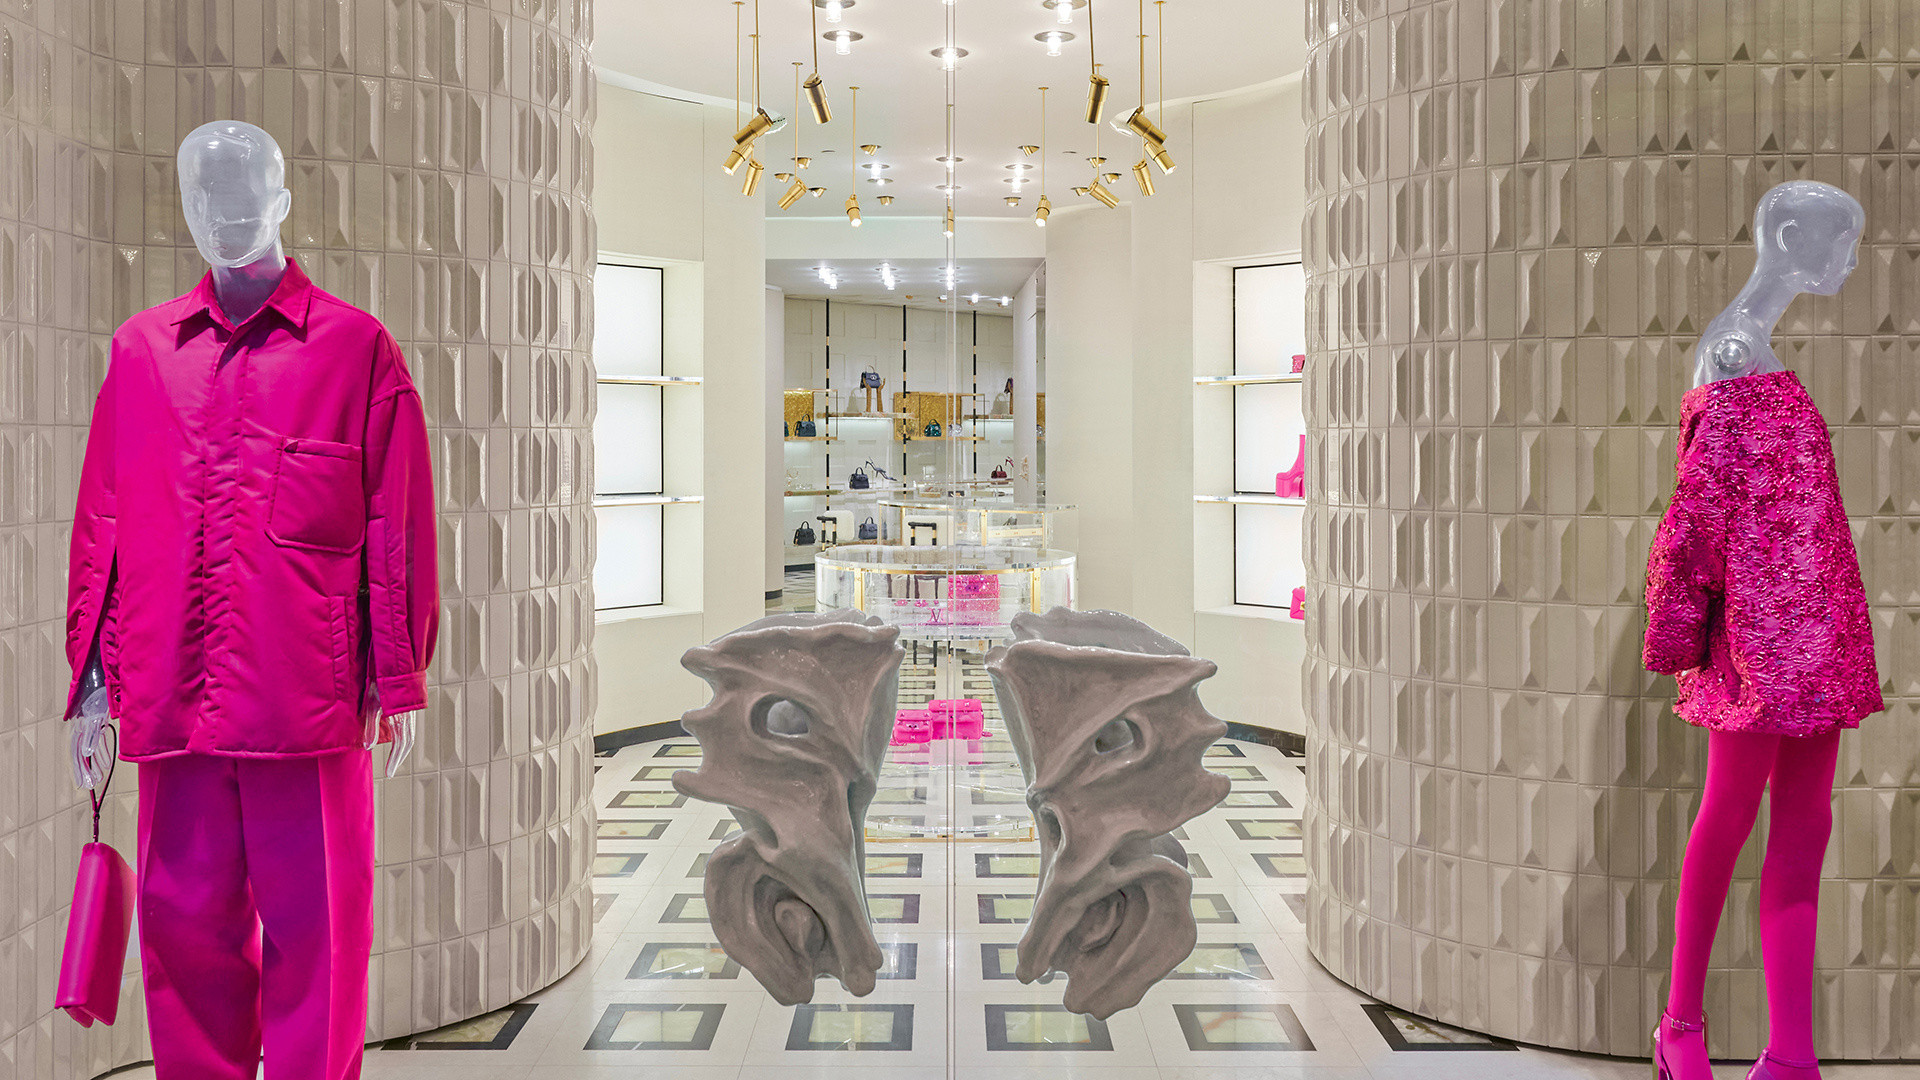 Maison Valentino Opens Two New Stores At Bergdorf Goodman